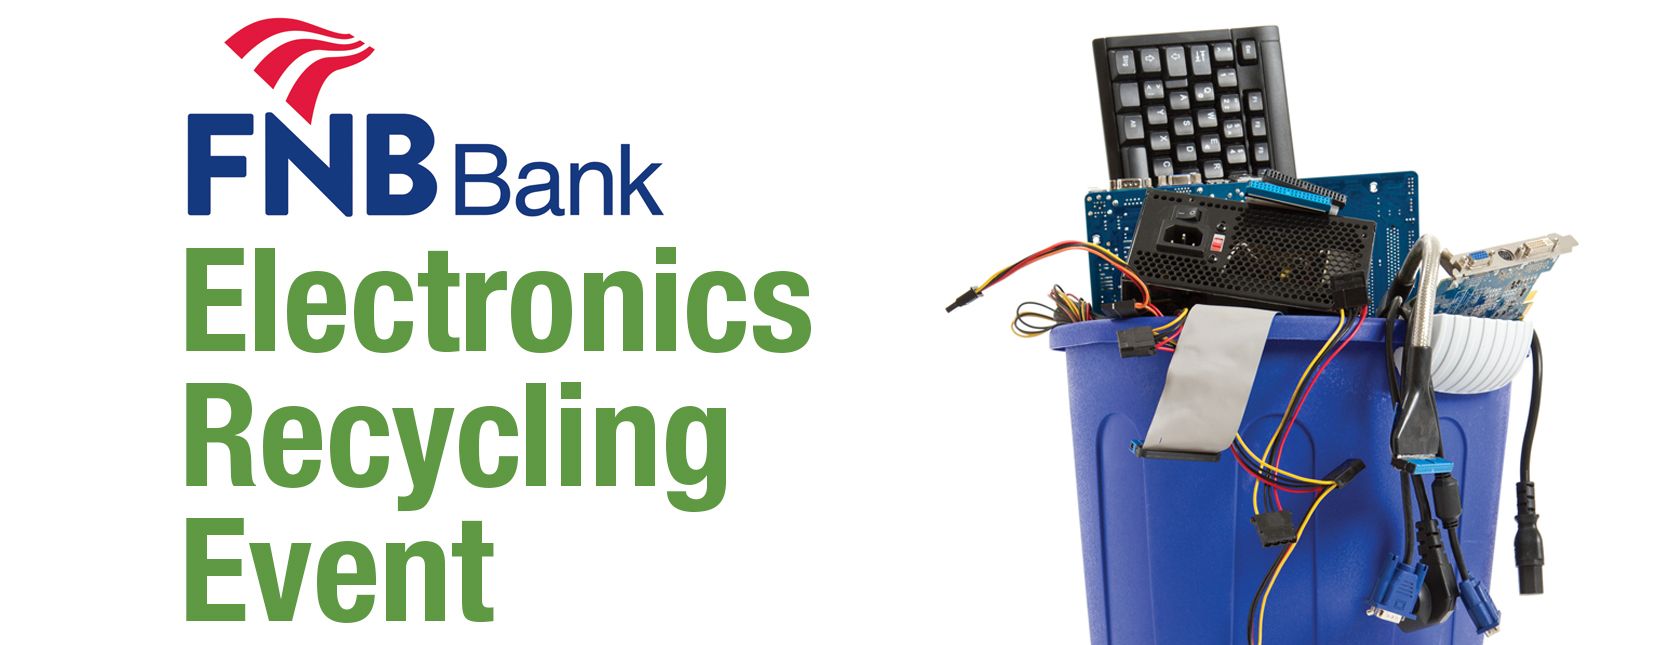 Electronics Recycling Event at FNB Bank on May 4, 2019